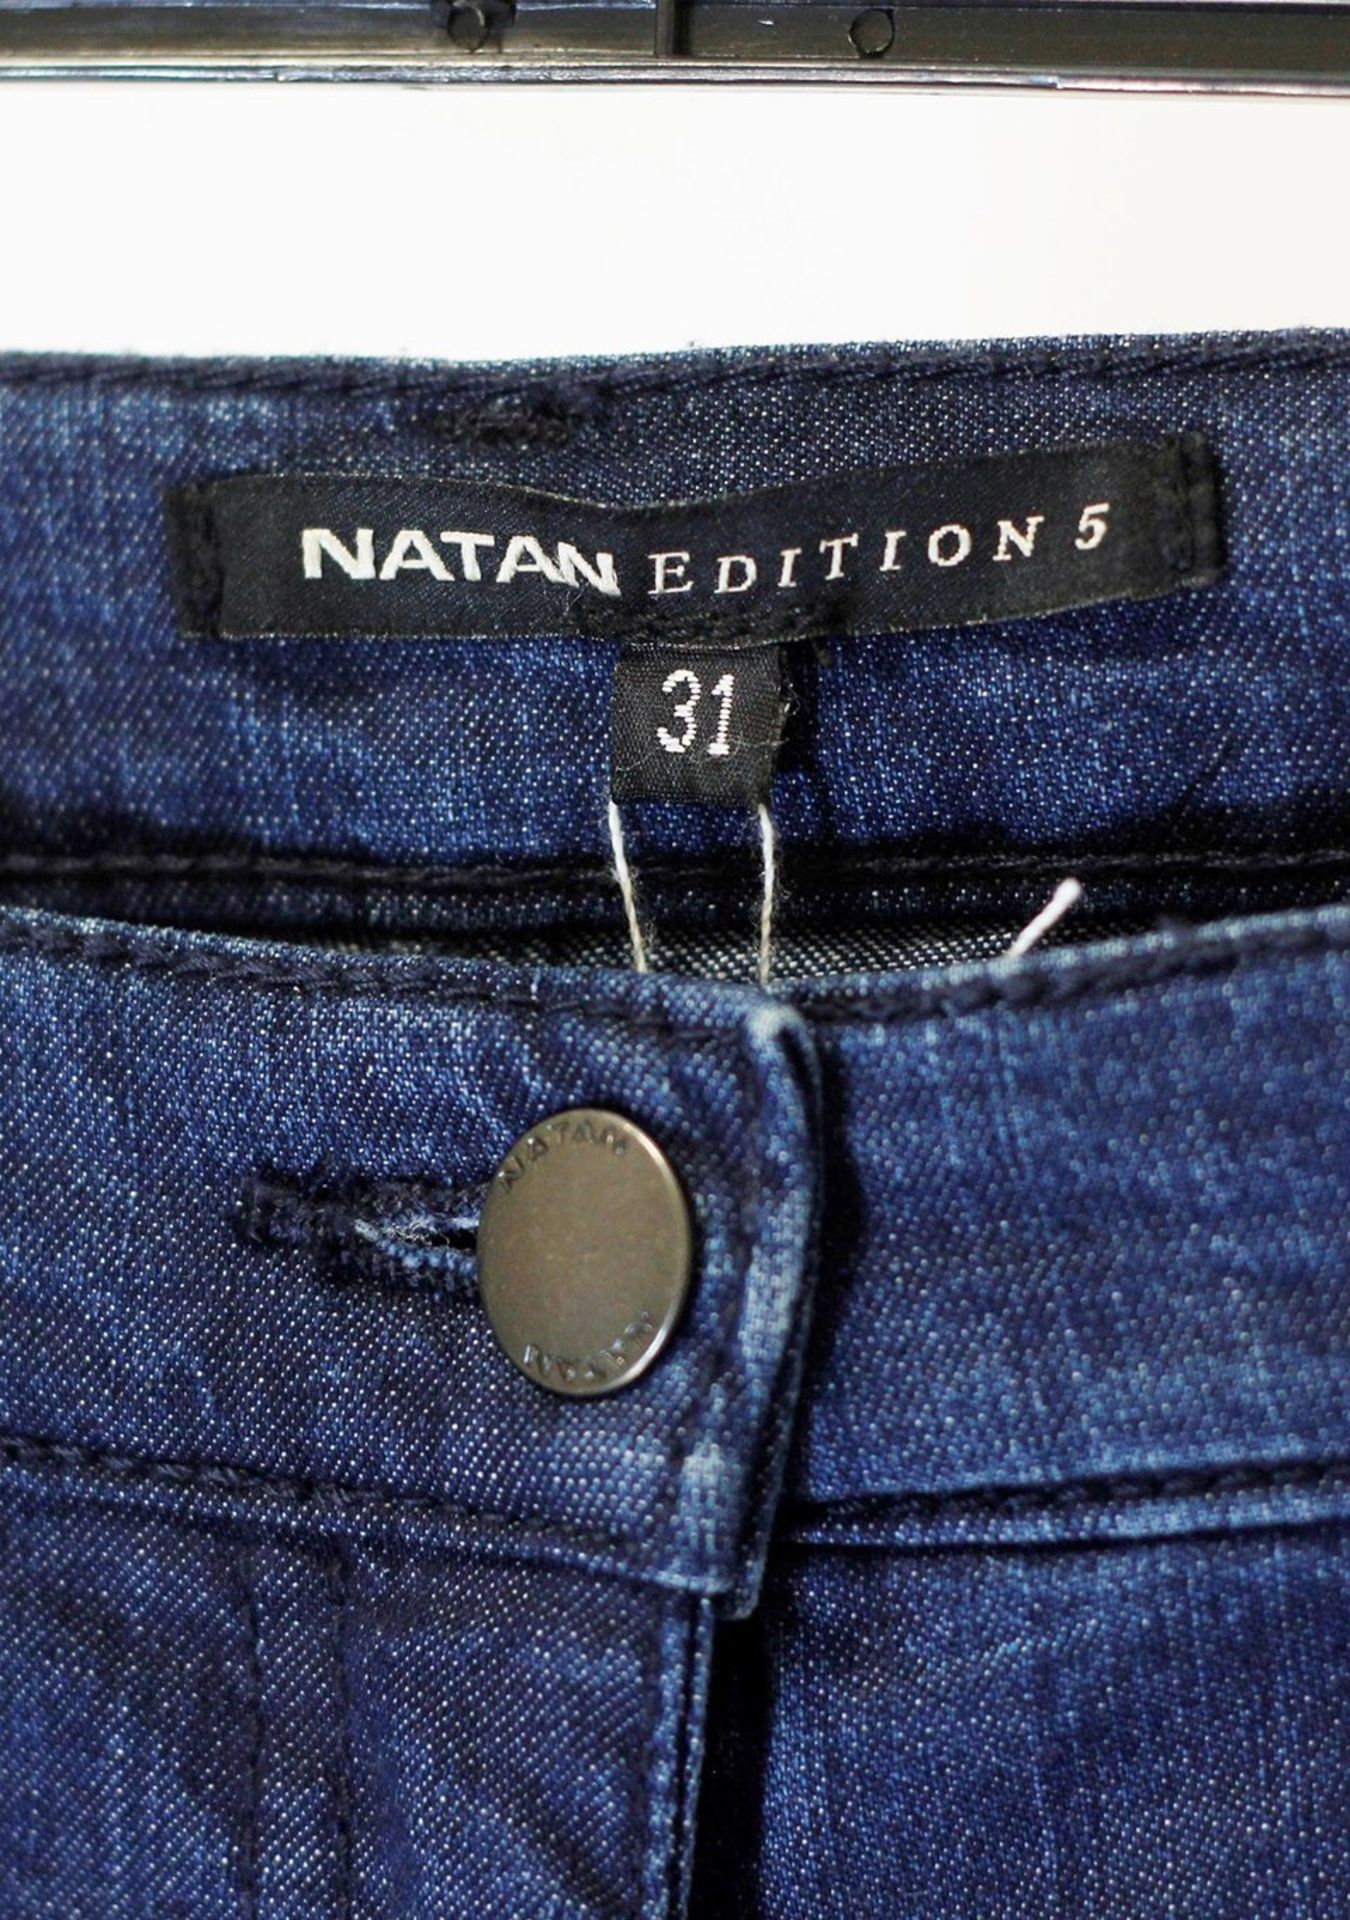 1 x Natan Denim Jeans - Size: 31 Waist - Material: 90% Cotton, 8% Polyester, 2% Elastane - From a - Image 2 of 5